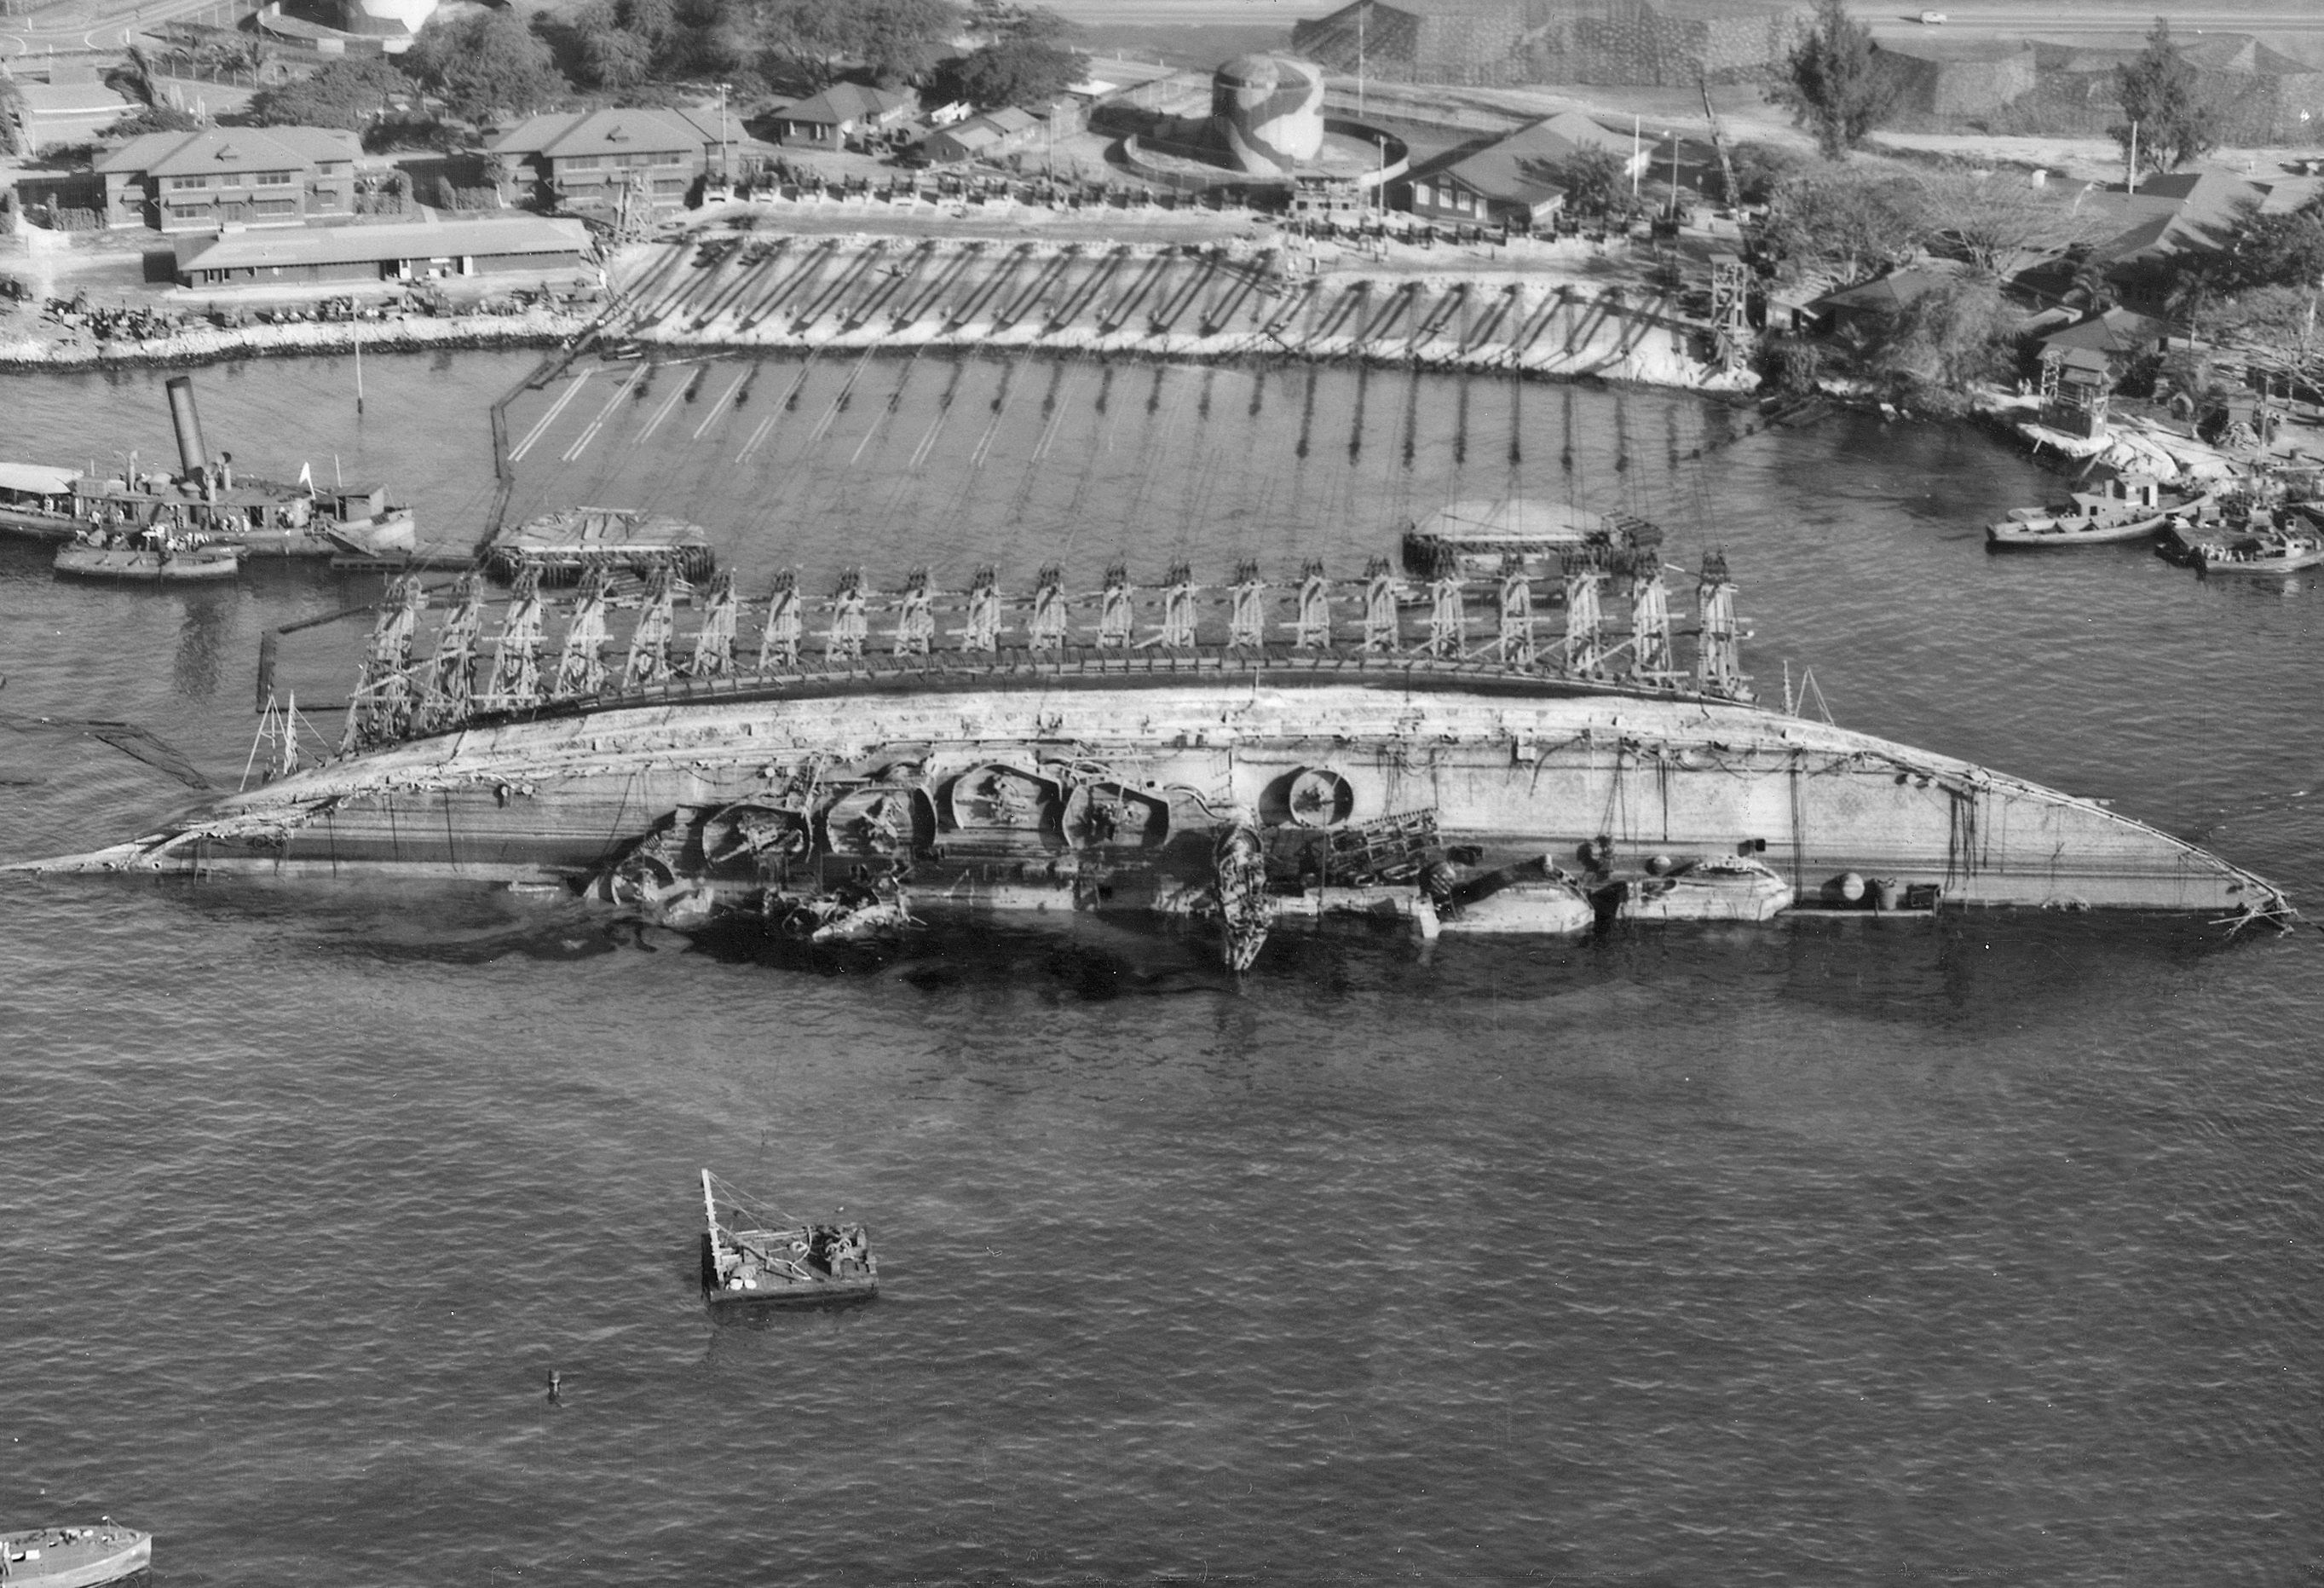 The Navy attempts to right USS Oklahoma on March 19, 1943. National Archives photo.